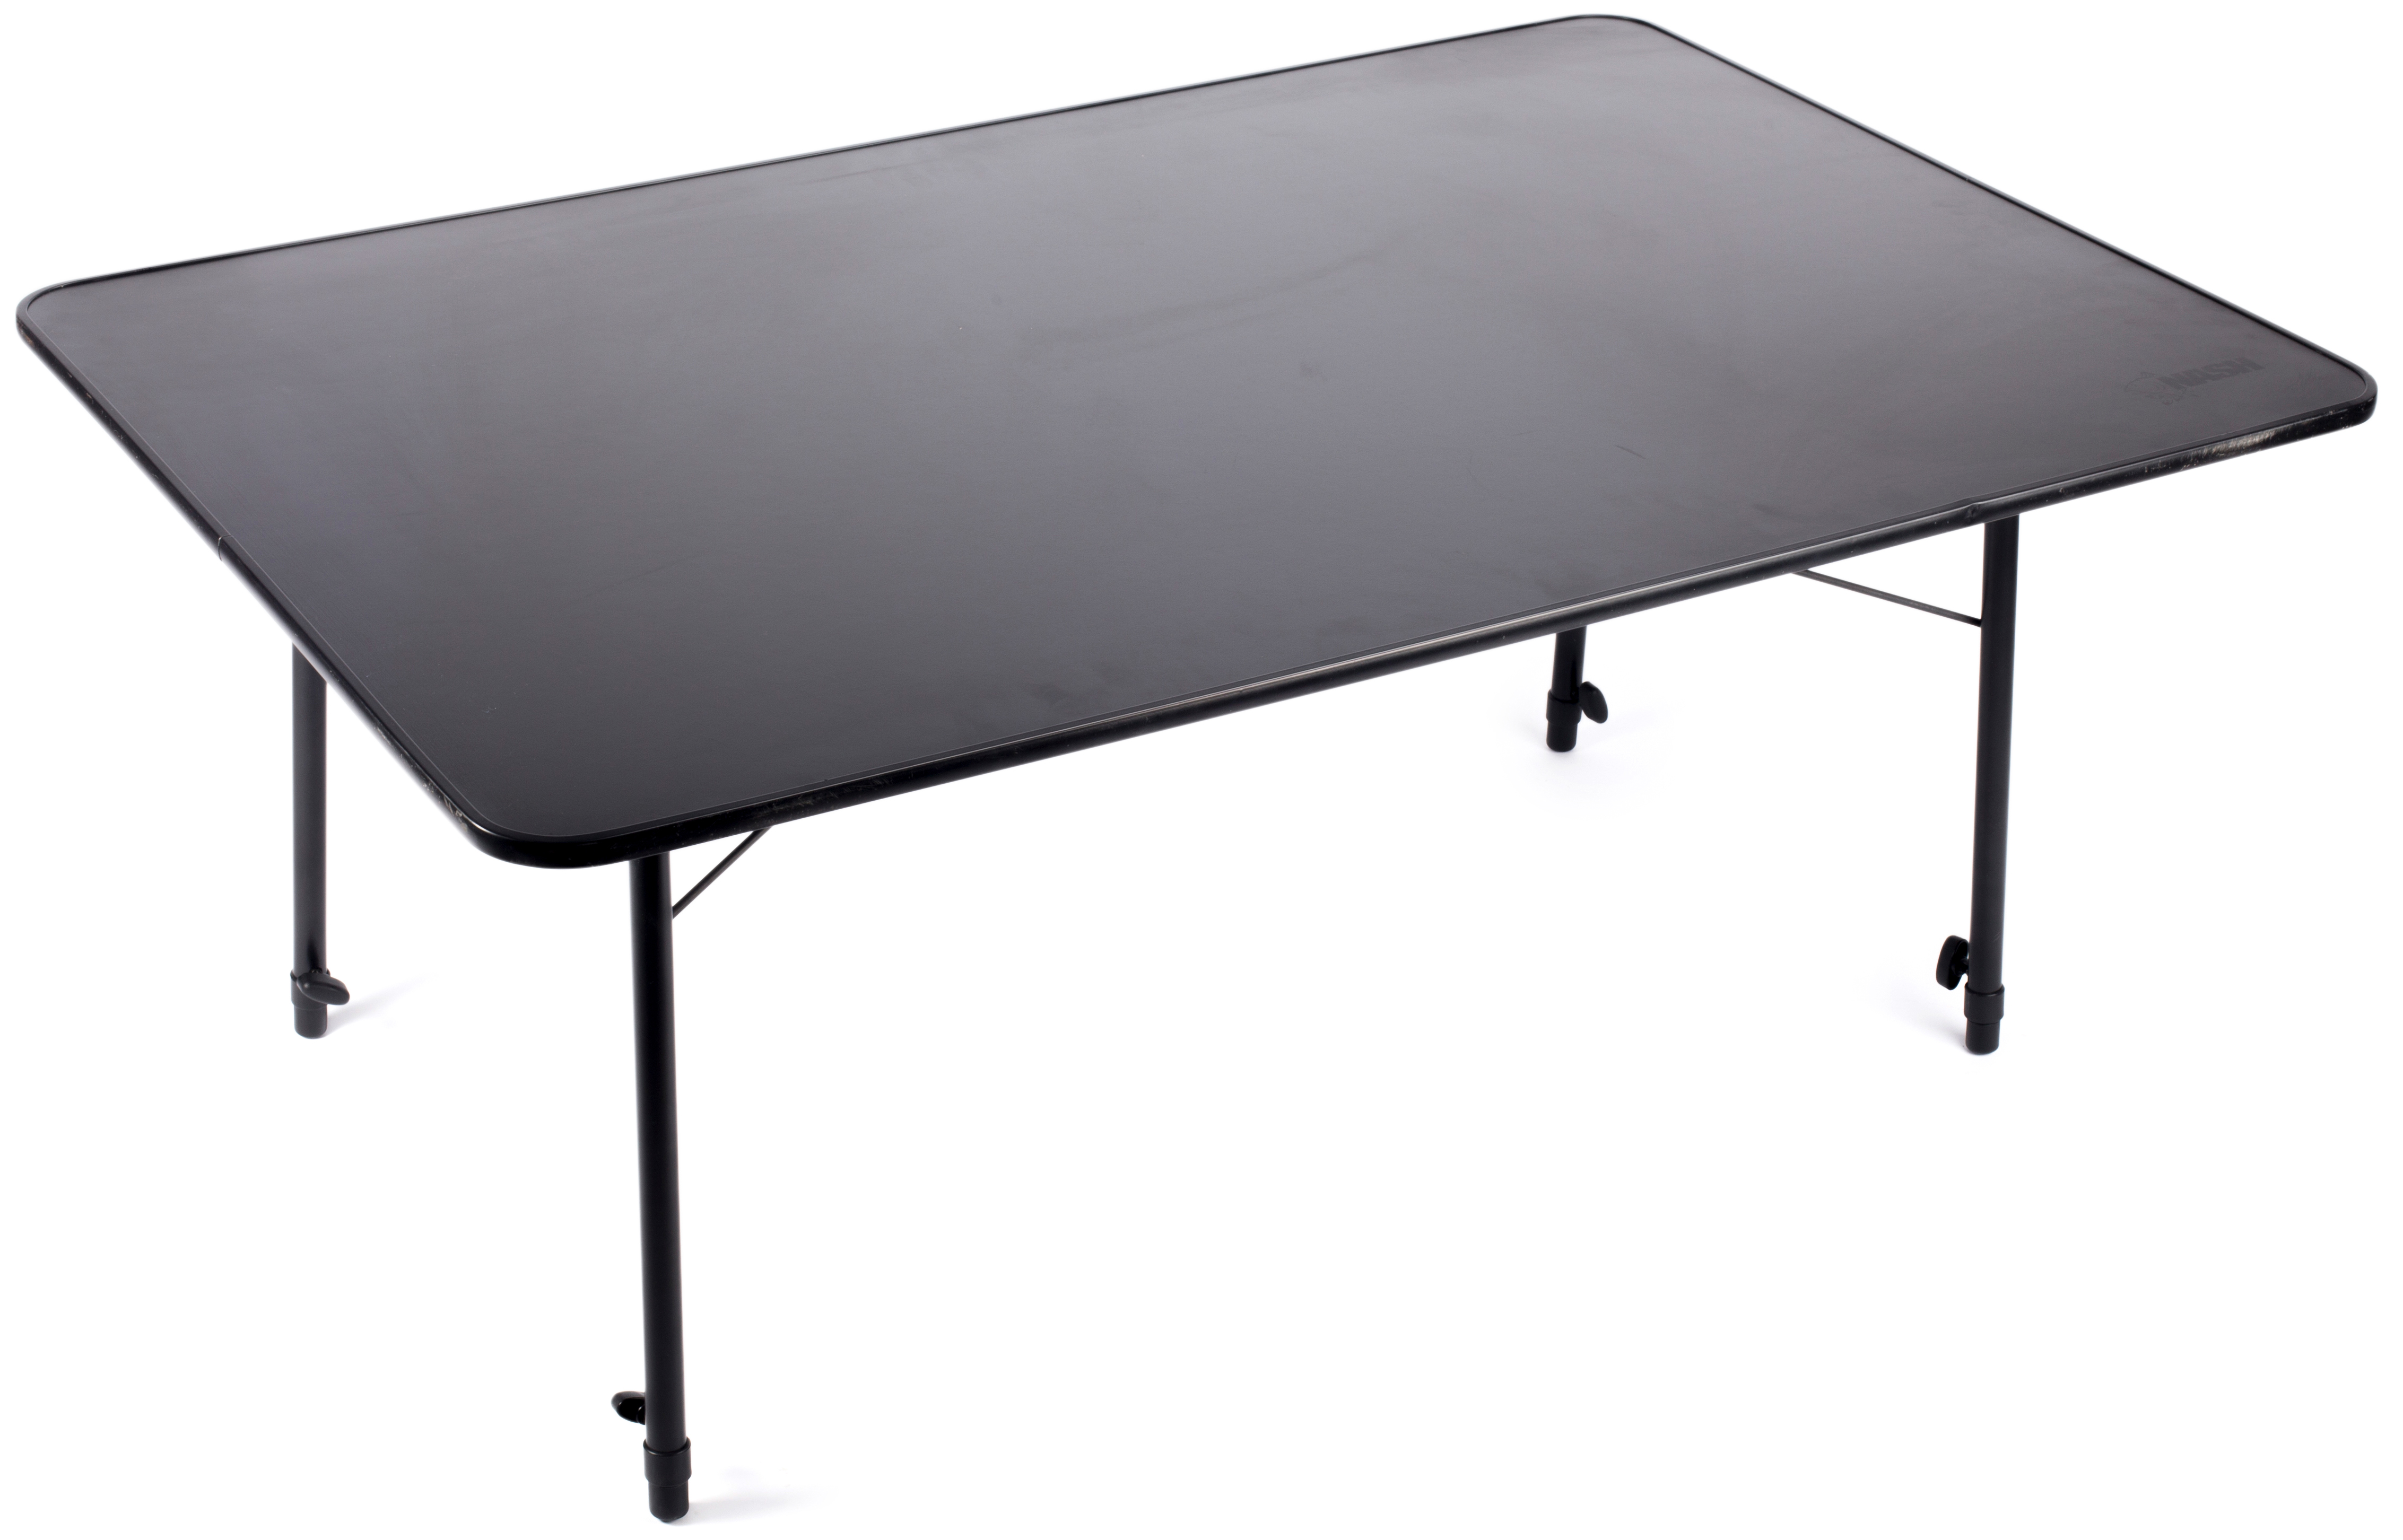 Accessorio Nash Bank life table large